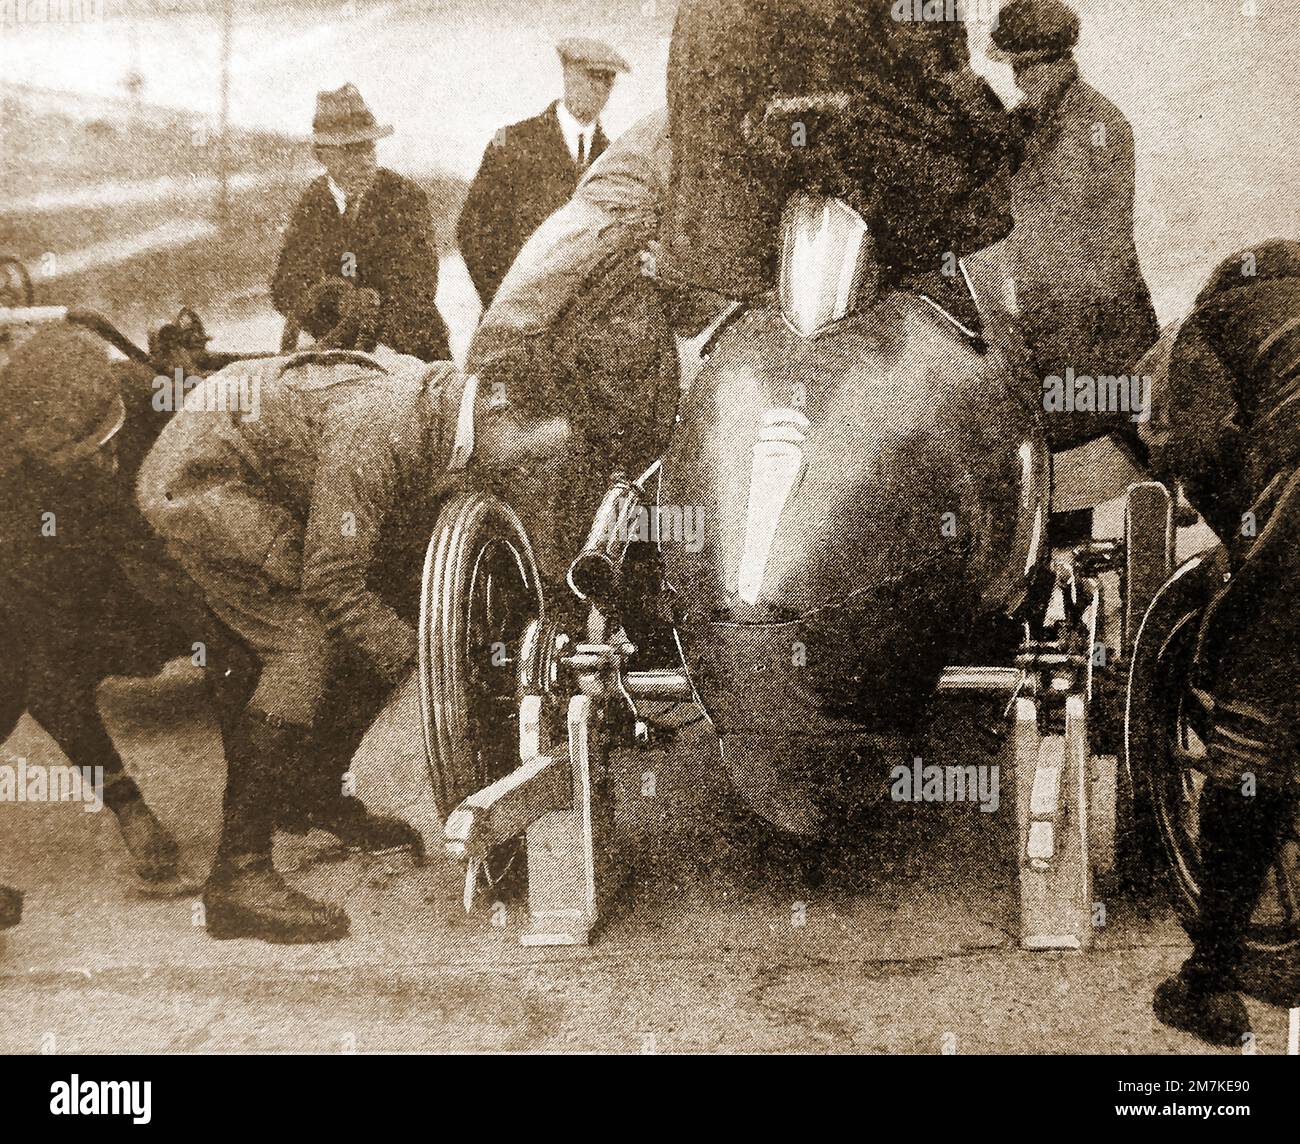 A 1930 image of seconds' (mechanics) changing tyres at a pit stop at a British motor racing circuit Stock Photo